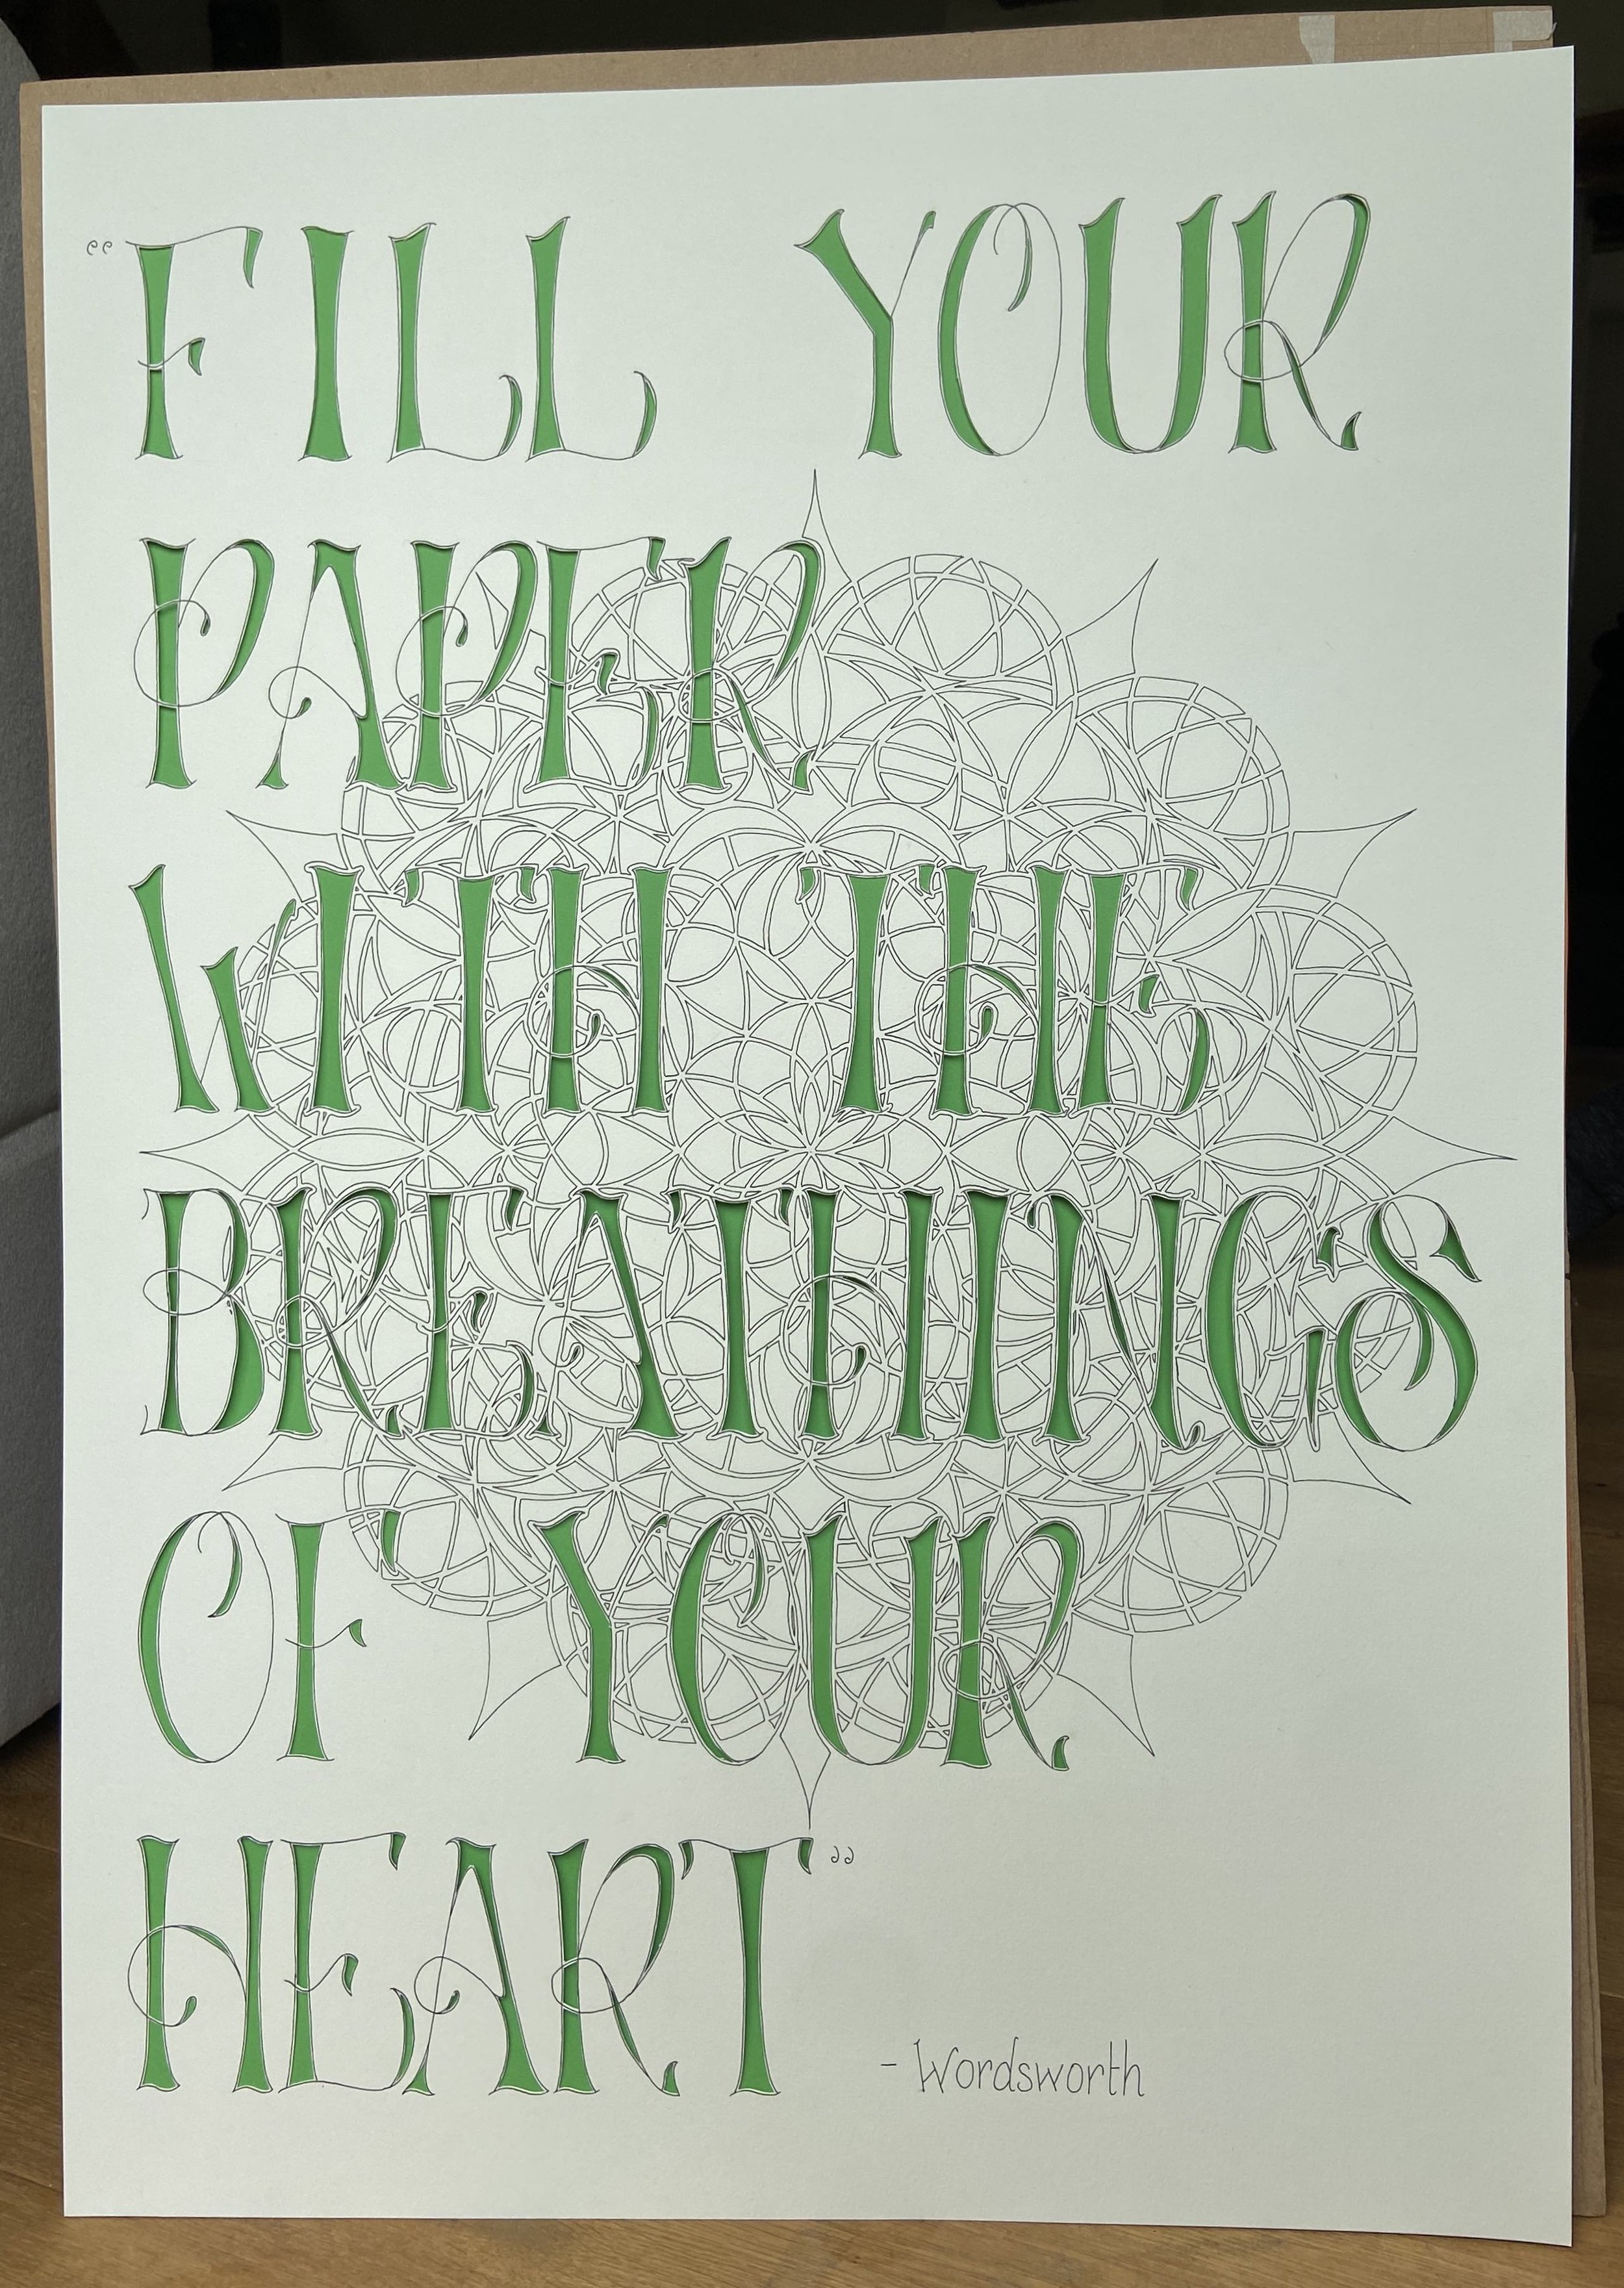 h_johnston_Fill_Your_Paper_With_The_Breathings_Of_Your_Heart_59.4x84.1cm (1).jpg